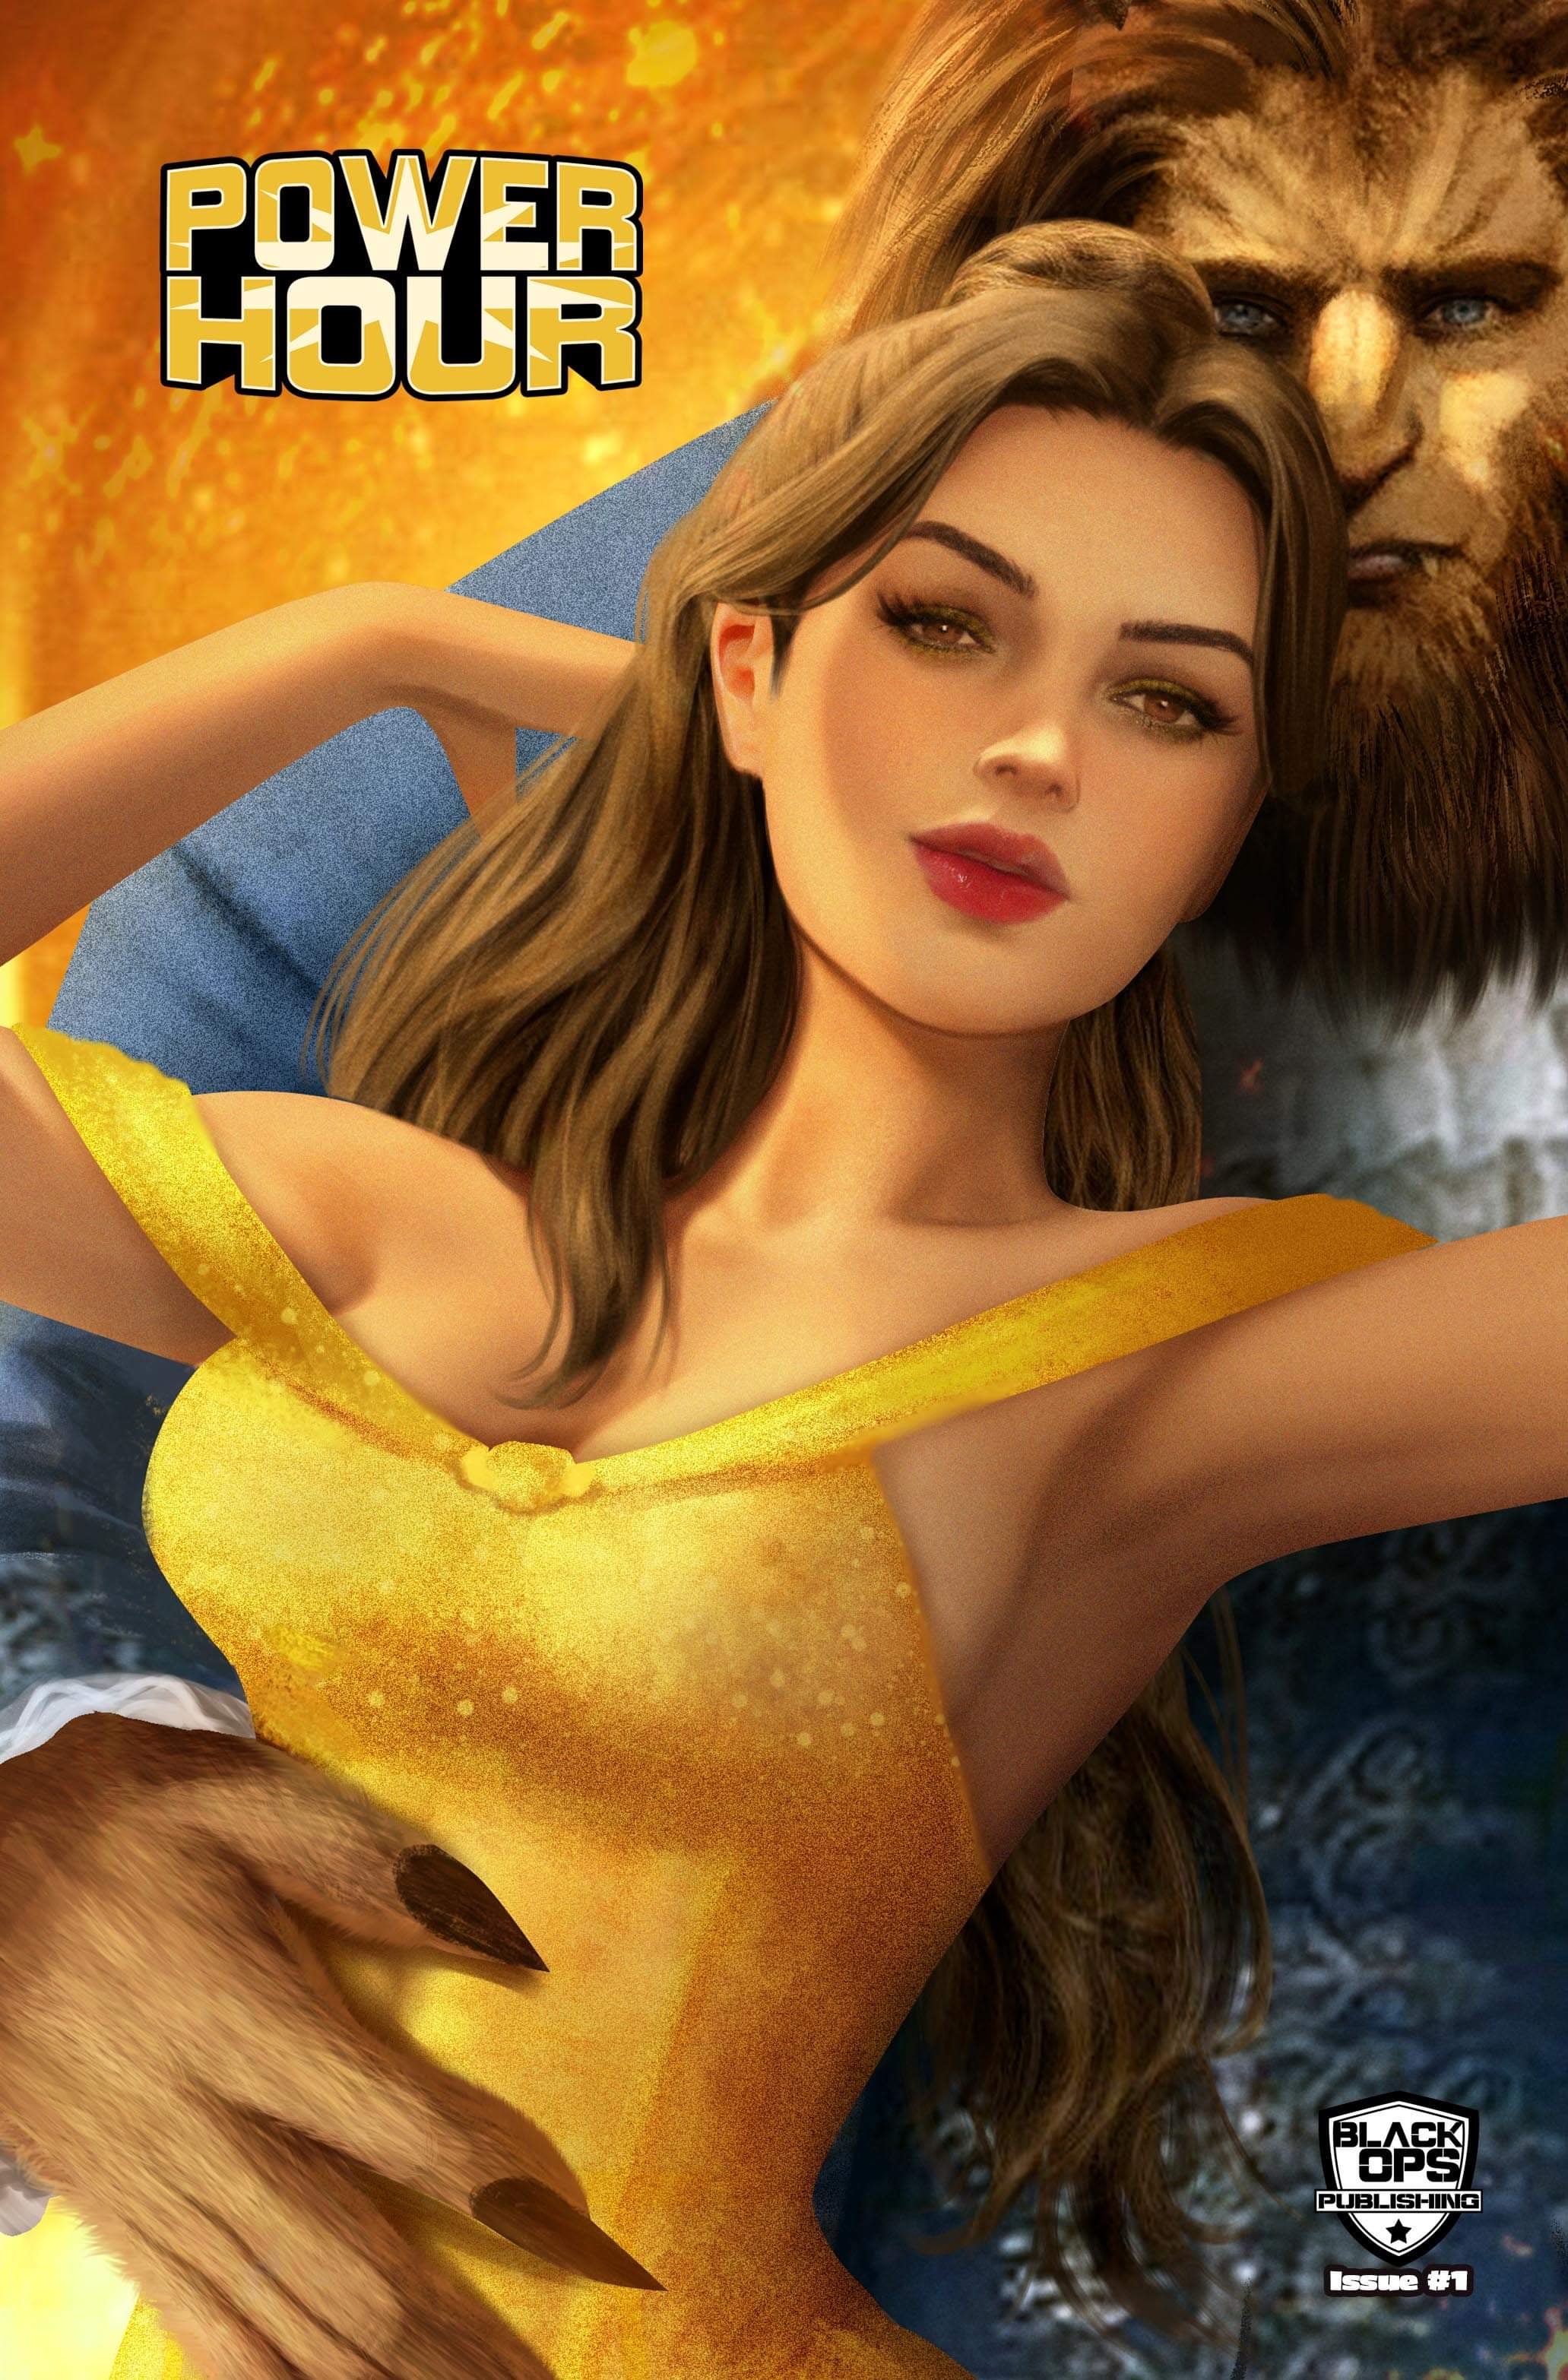 POWER HOUR BELLE COSPLAY EXCLUSIVE VARIANT COVERS